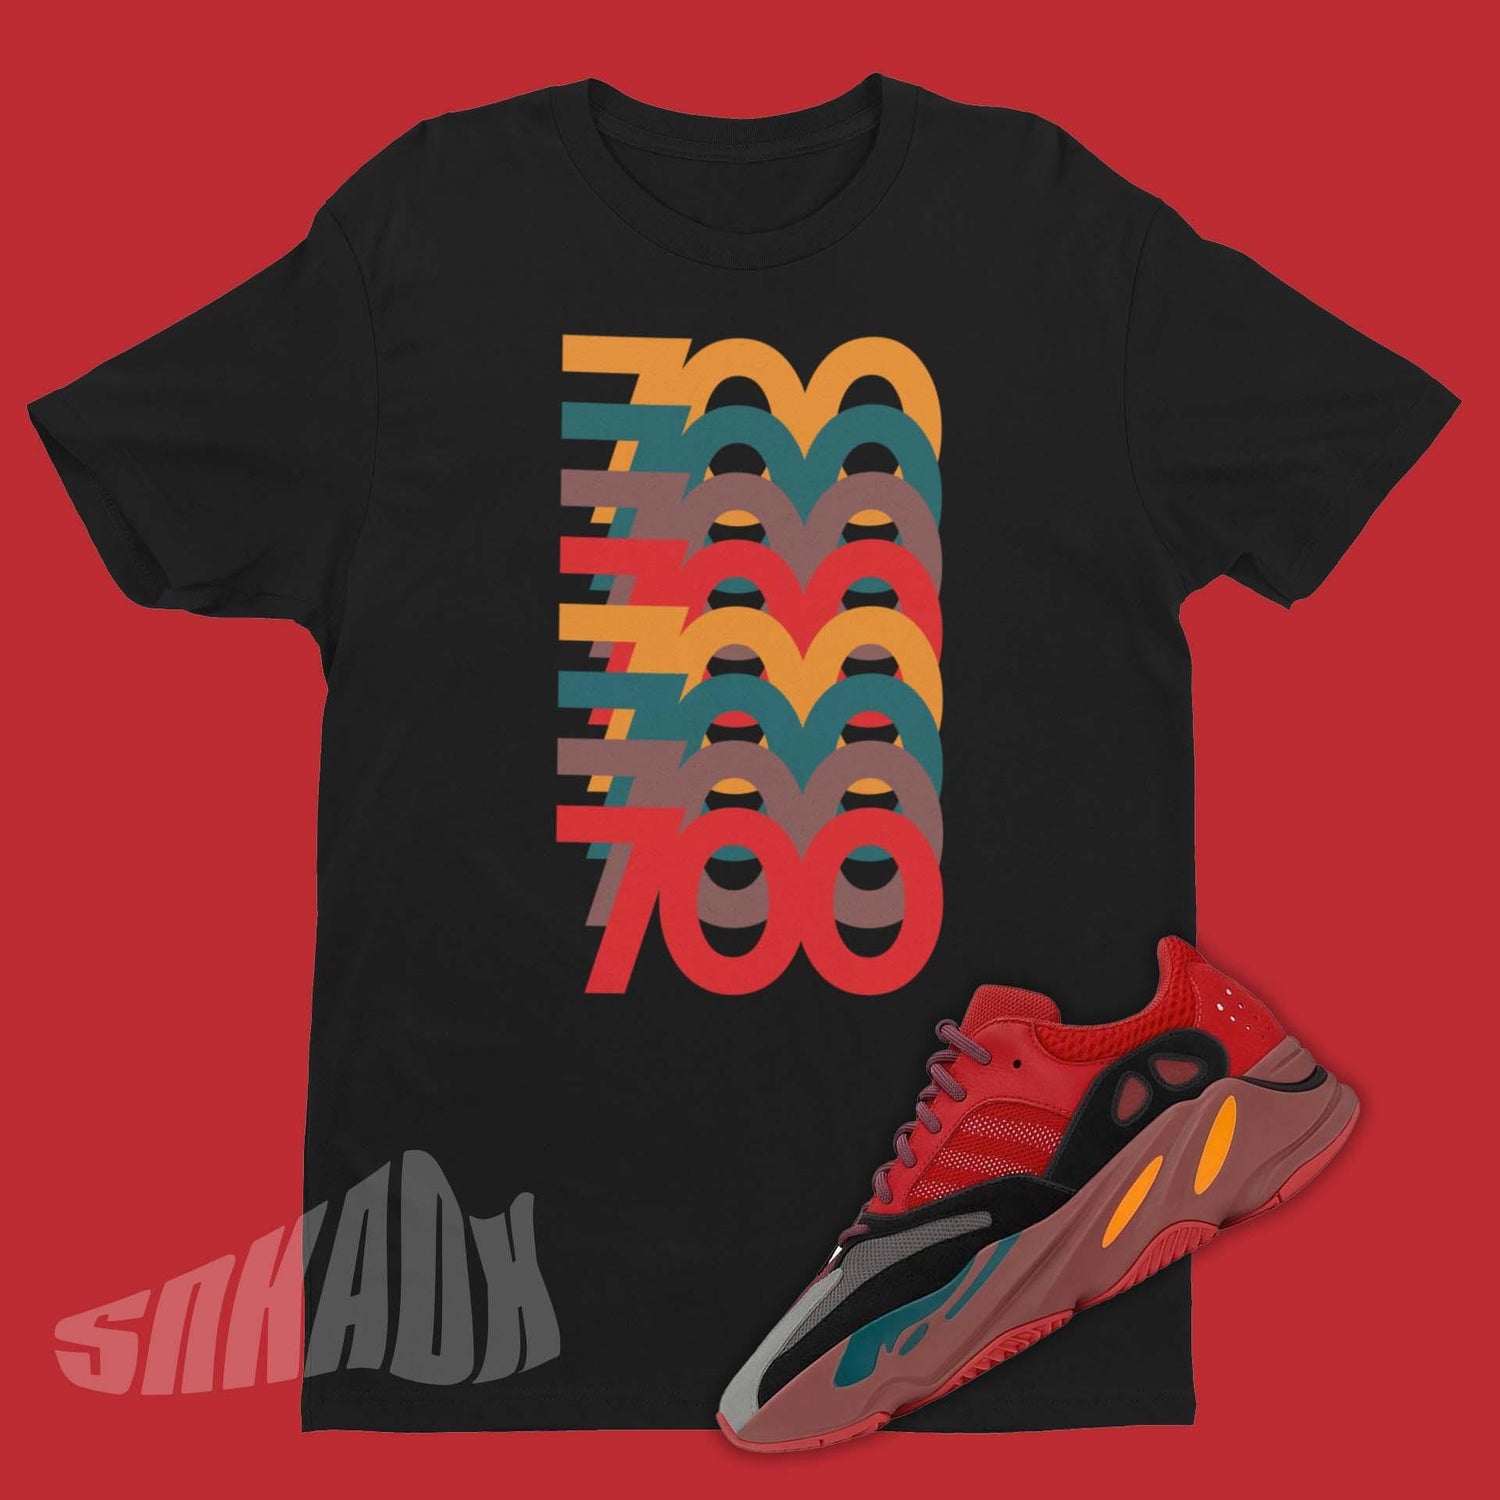 700 Stack Shirt To Match Yeezy Boost 700 Hi-Res Red